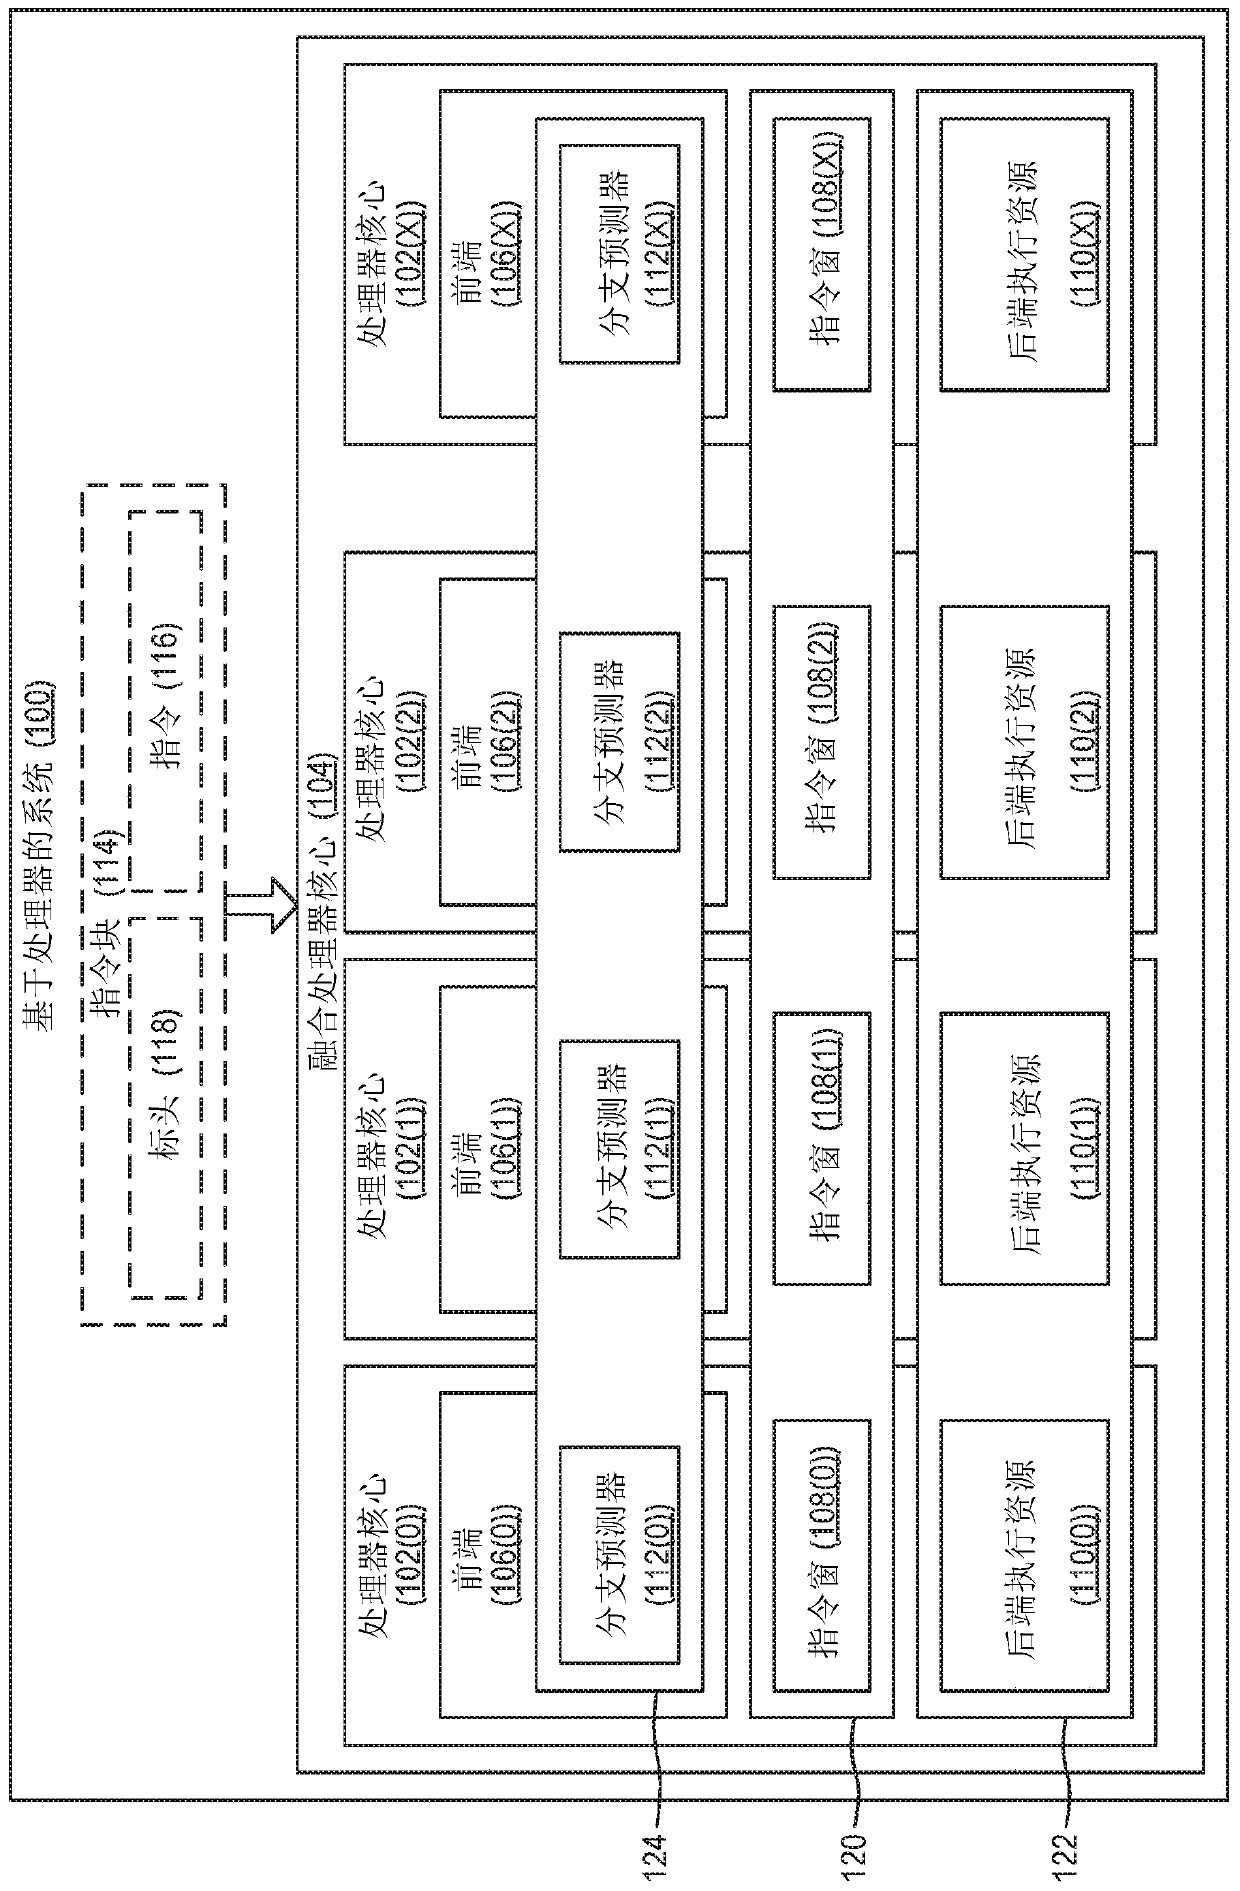 Performing distributed branch prediction using fused processor cores in processor-based systems